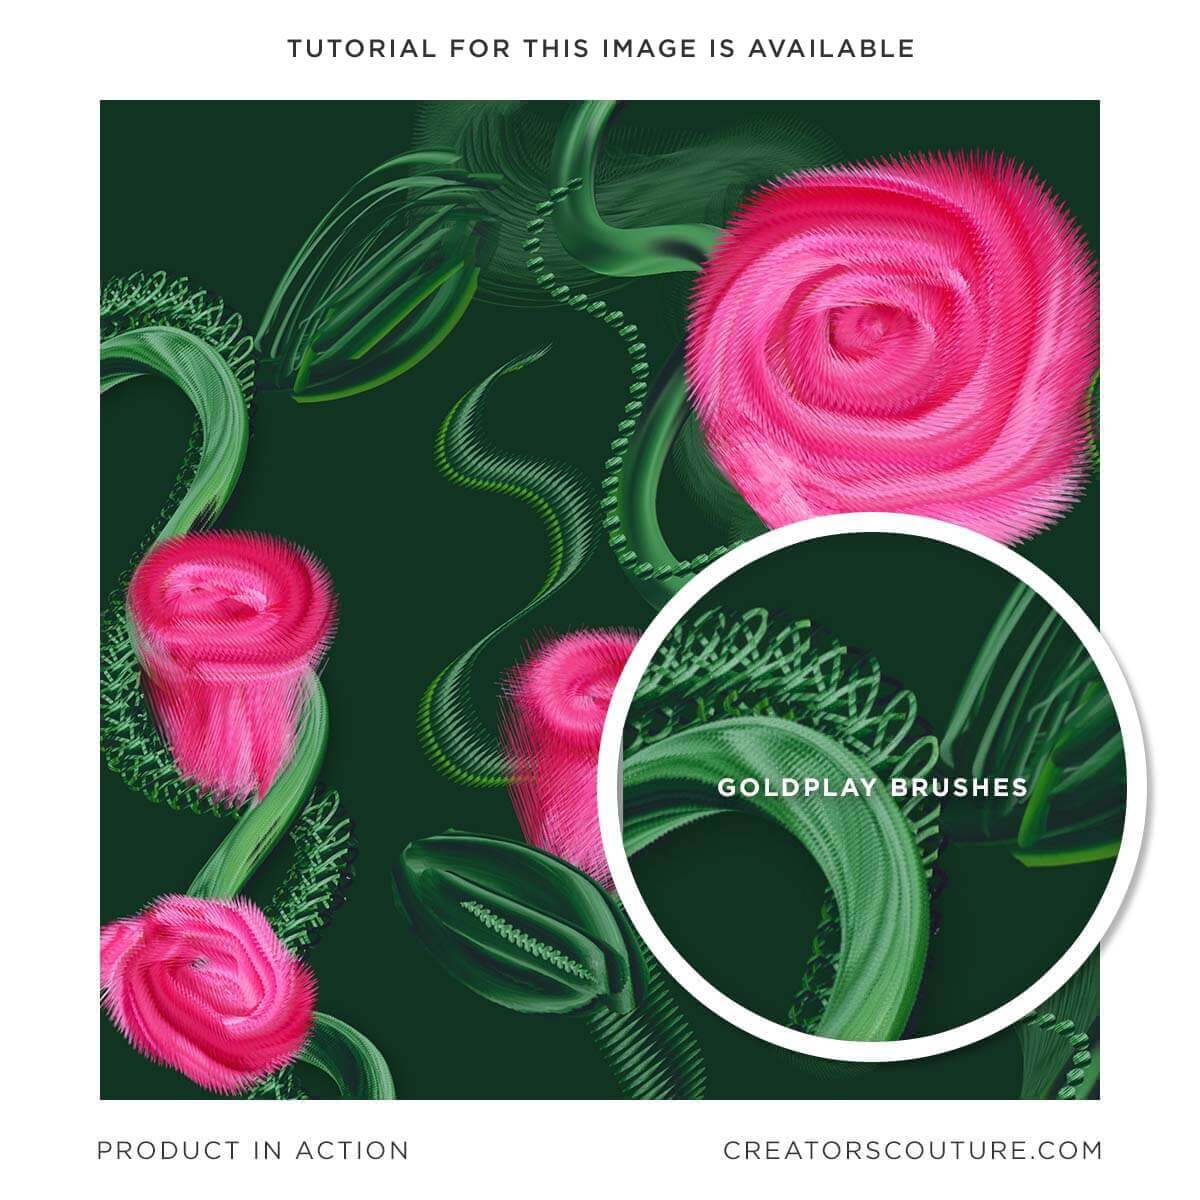 sample rose illustration using 3d metallic gold brushes in other colors, creating a 3d metallic green vine